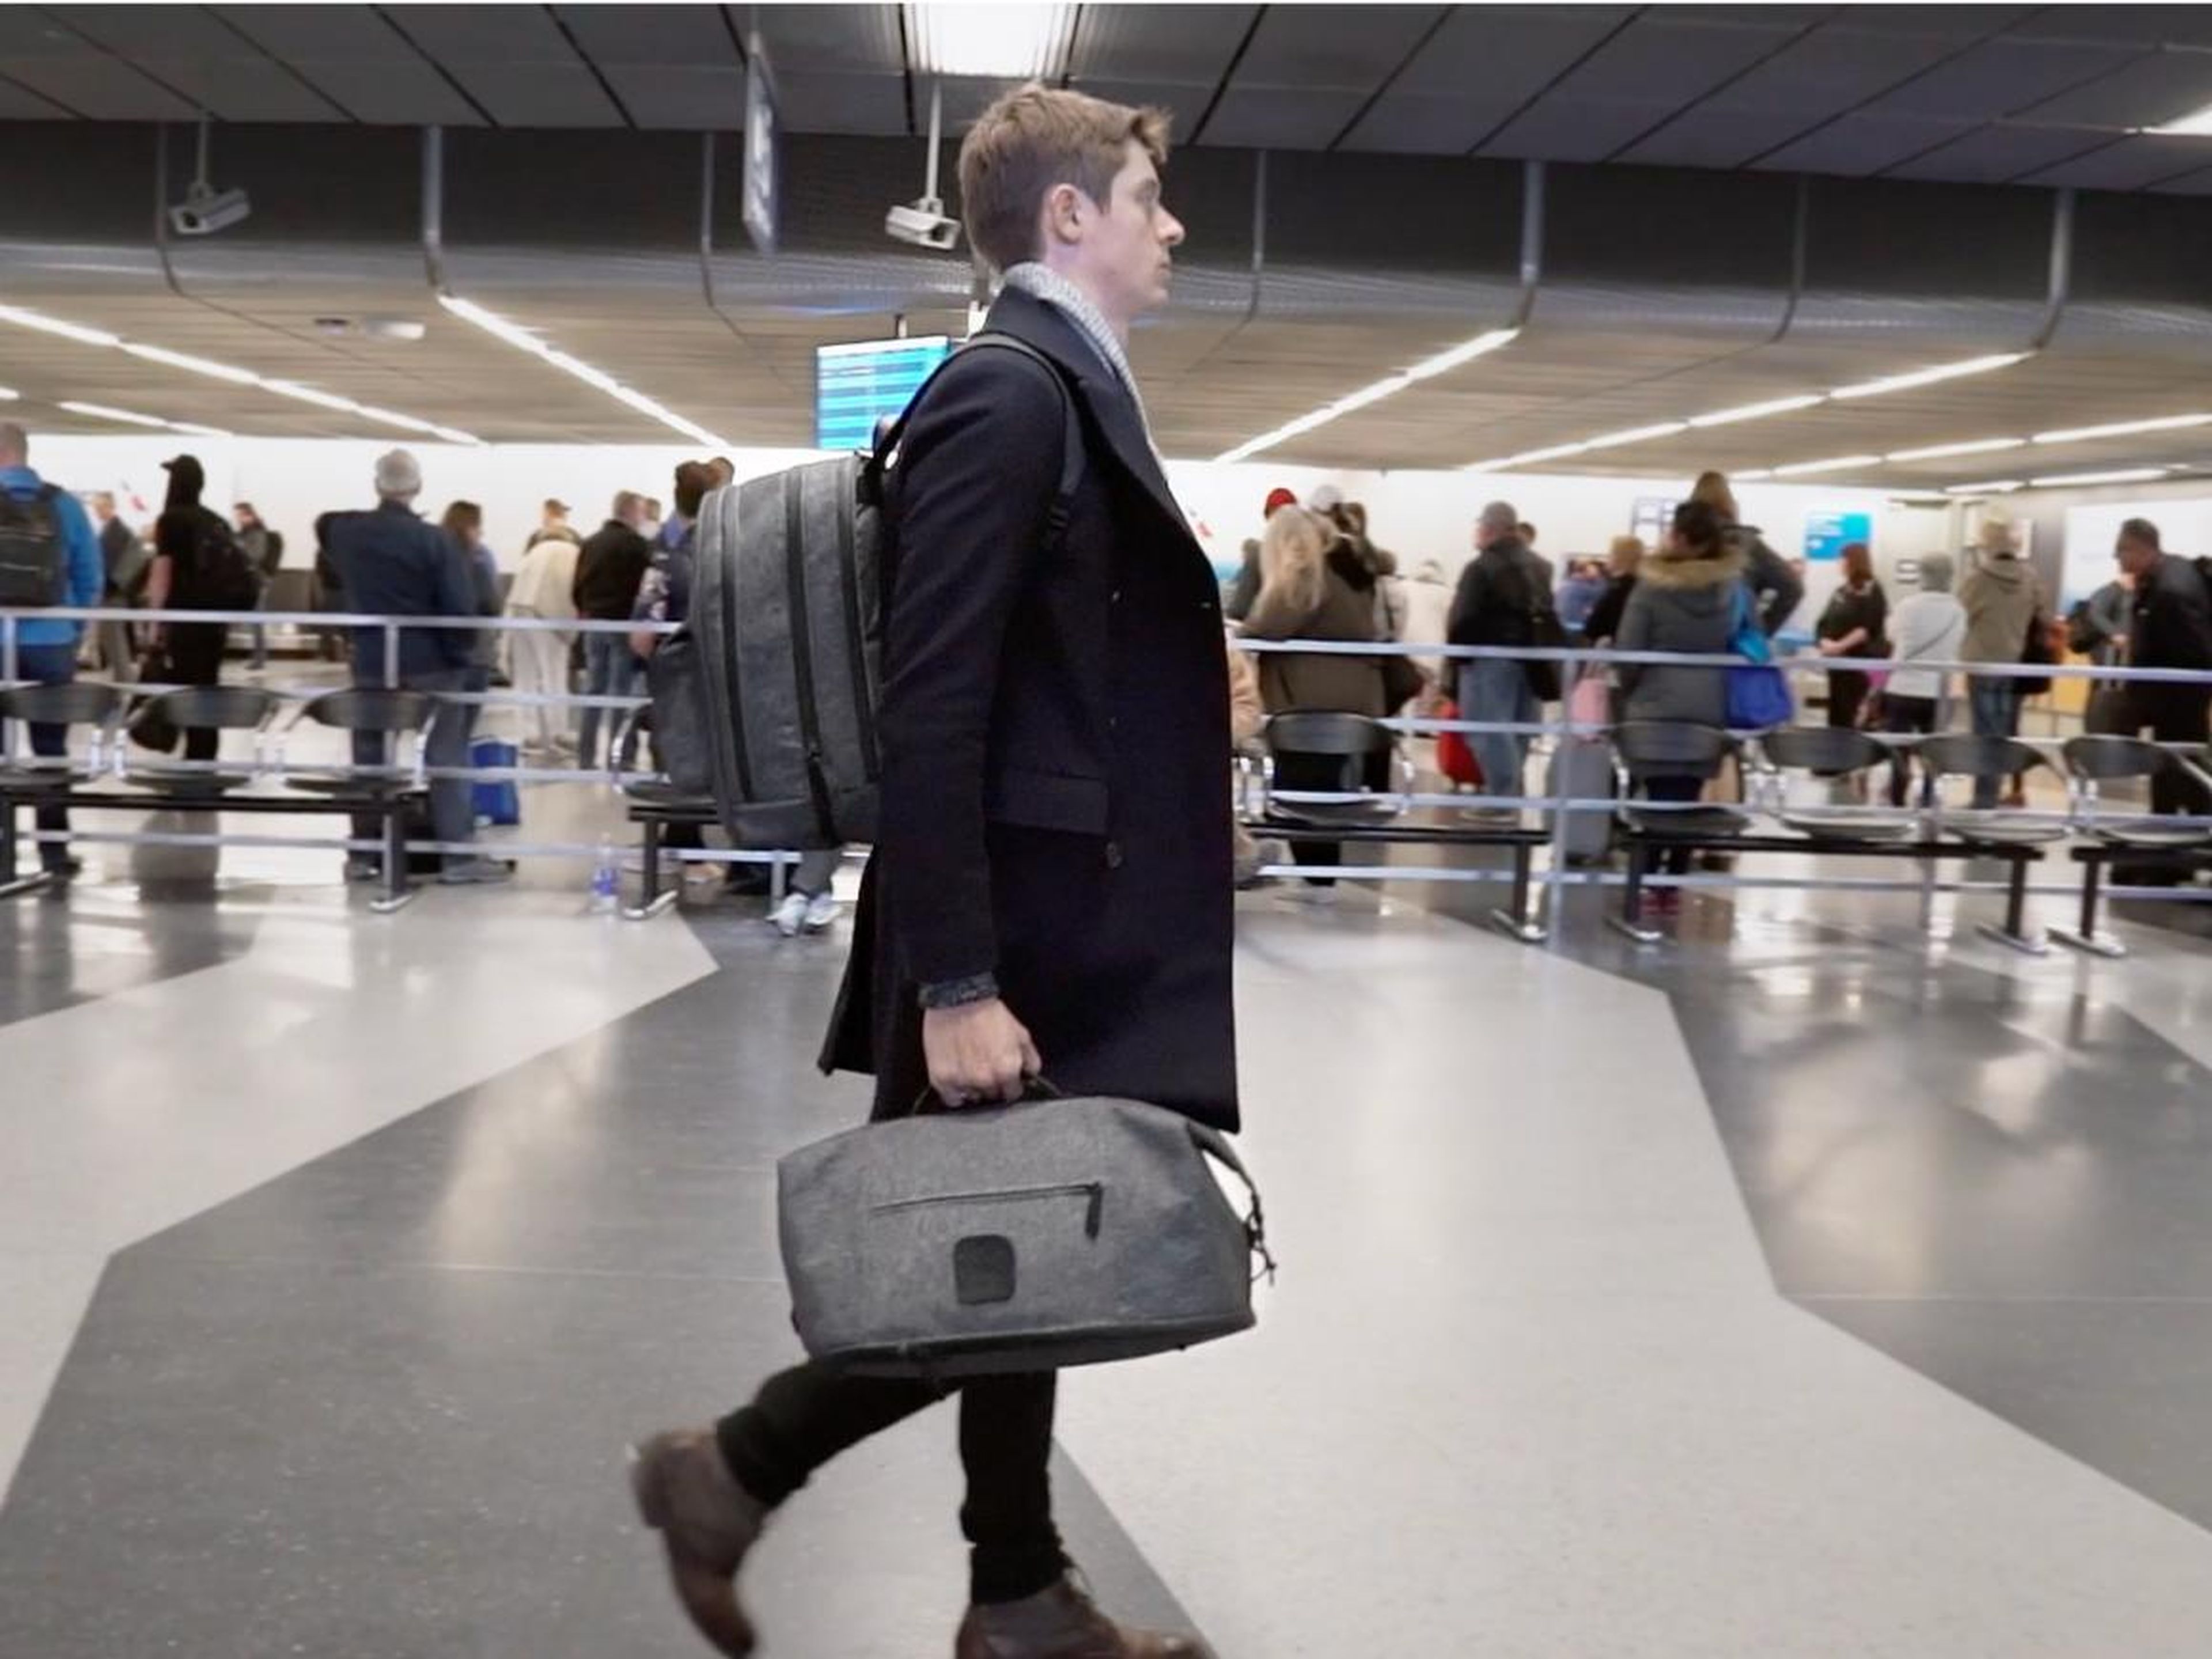 Webster says he's used the bags to store as much as two weeks' worth of luggage. He estimates he's saved hundreds of dollars in luggage fees — many airlines charge about $25 or more to check a bag.